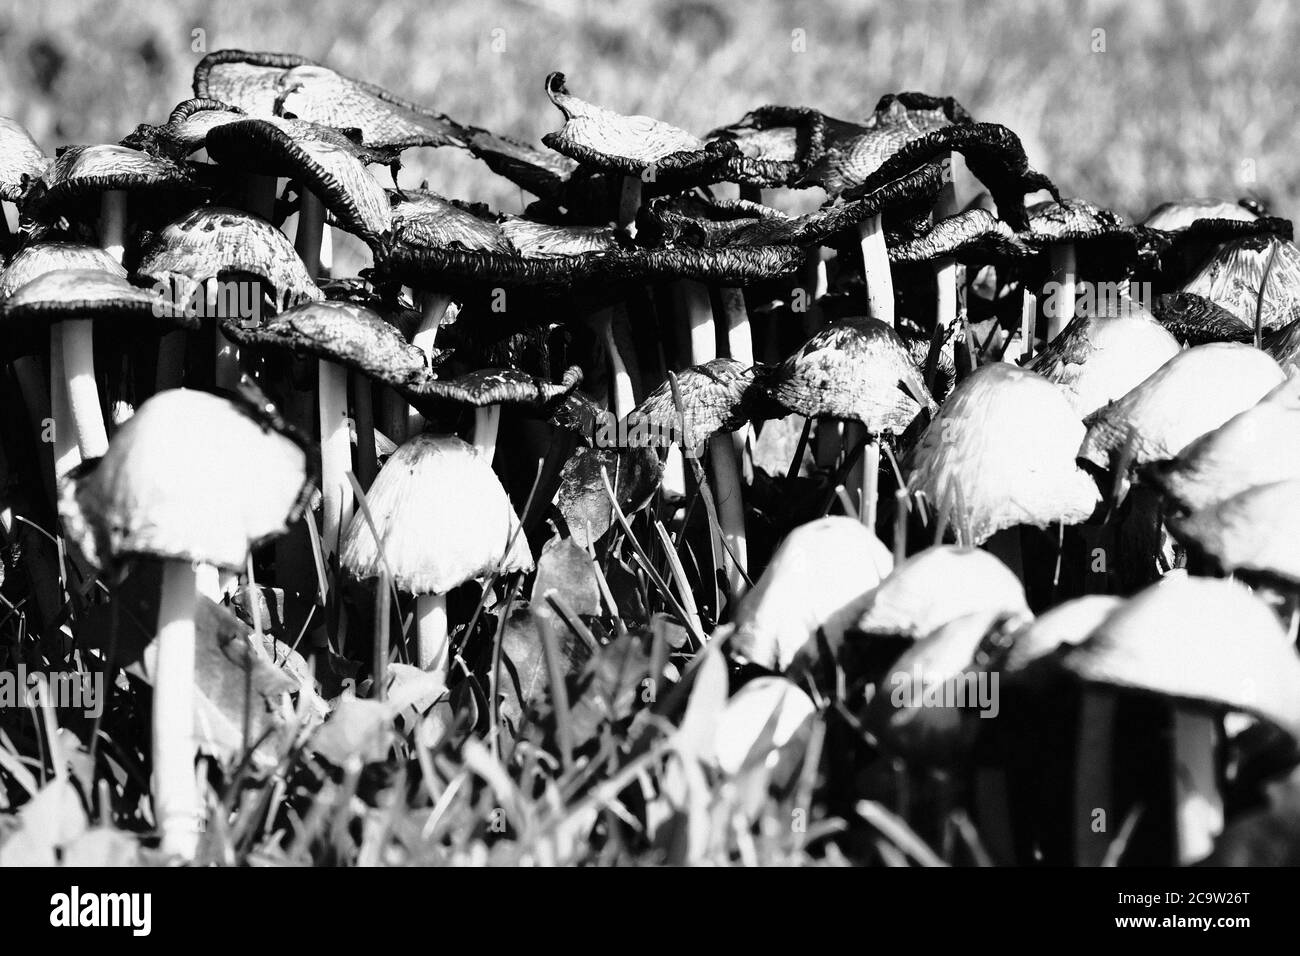 Black & white shot of a large clump of common inkcap (Coprinopsis atramentaria) in various stages of growth & deliquescence. Ottawa, Ontario, Canada. Stock Photo